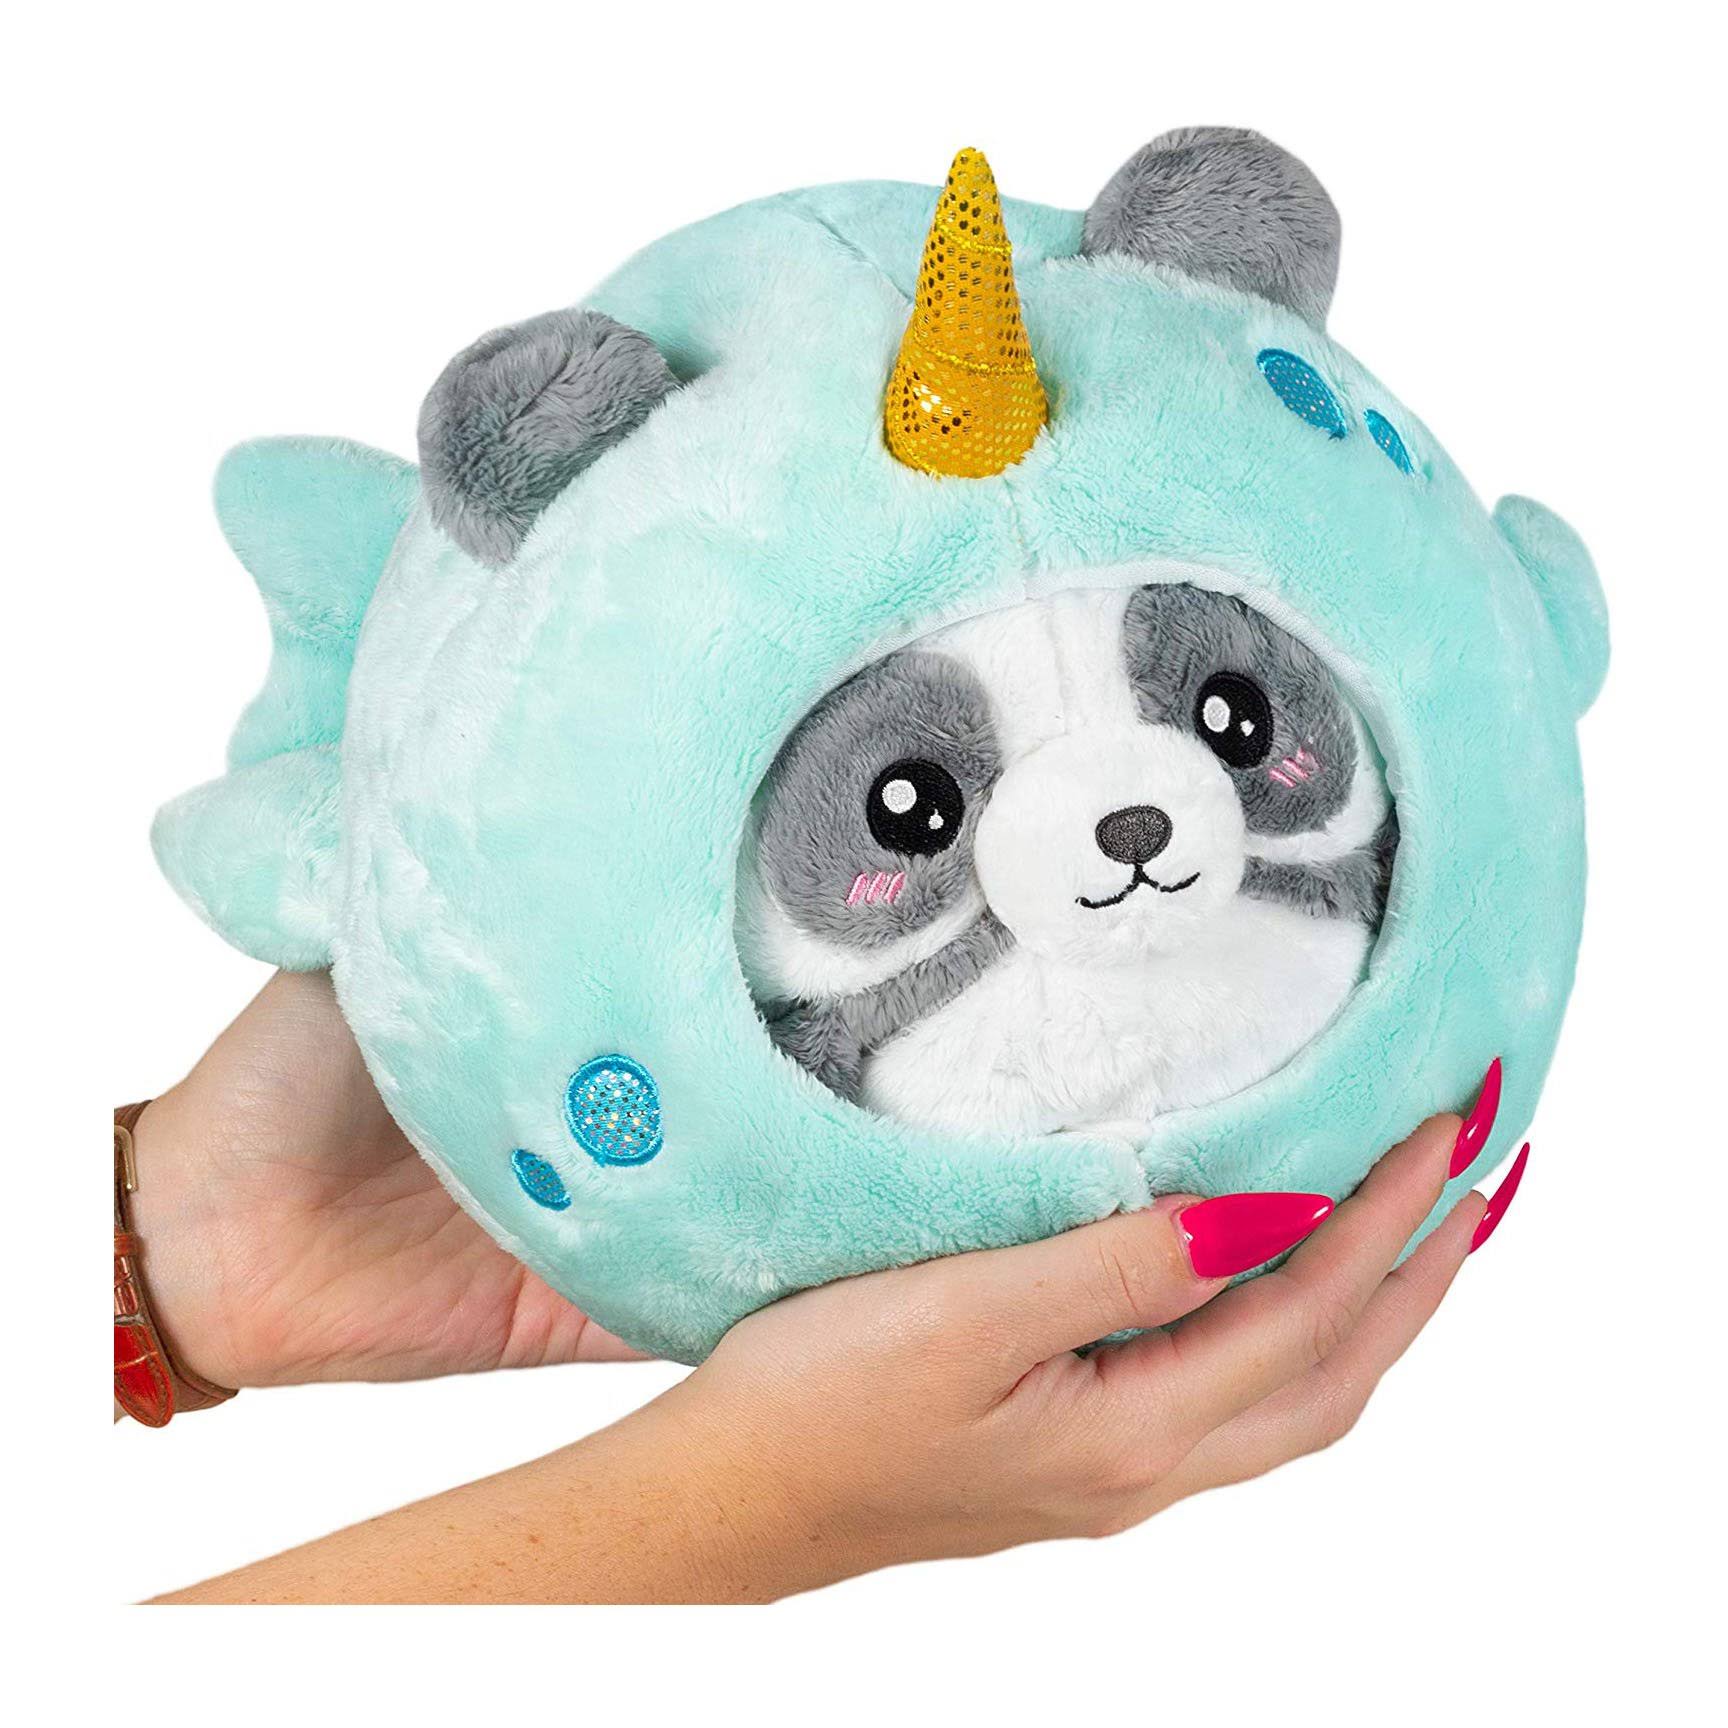 Squishable UnderCover Panda in Narwhal 7"